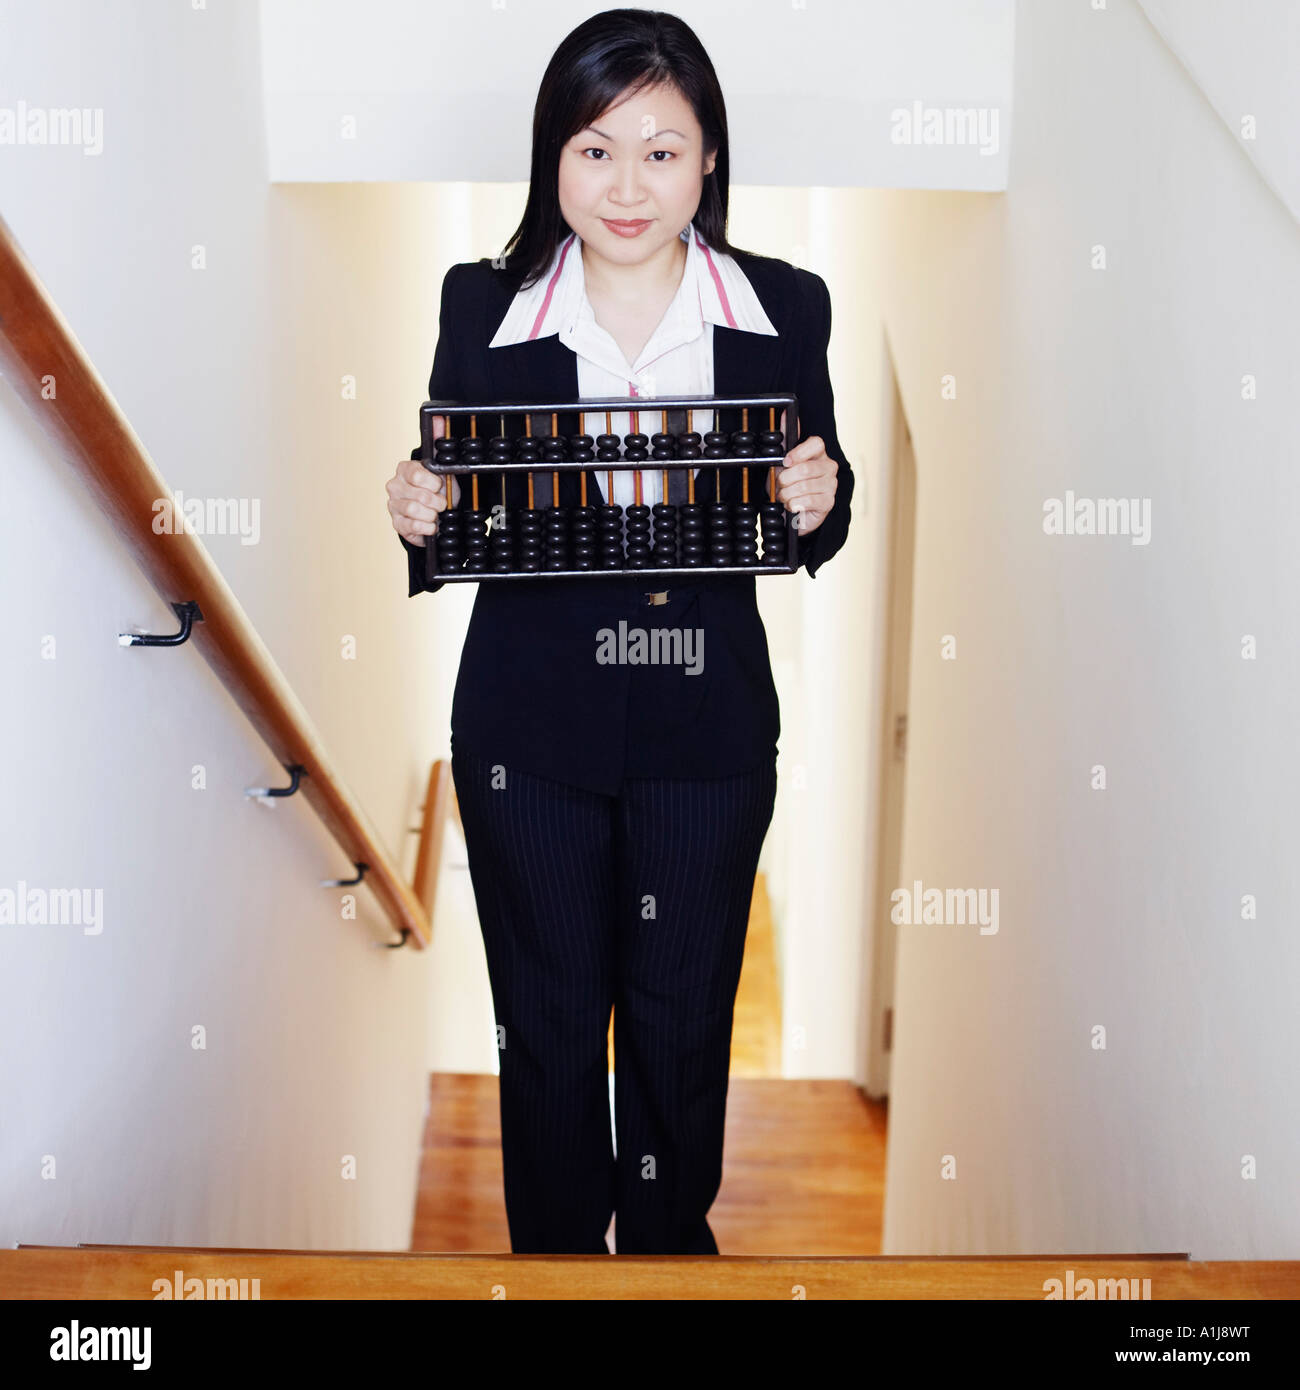 Portrait of a businesswoman holding an abacus and standing on the staircase Stock Photo